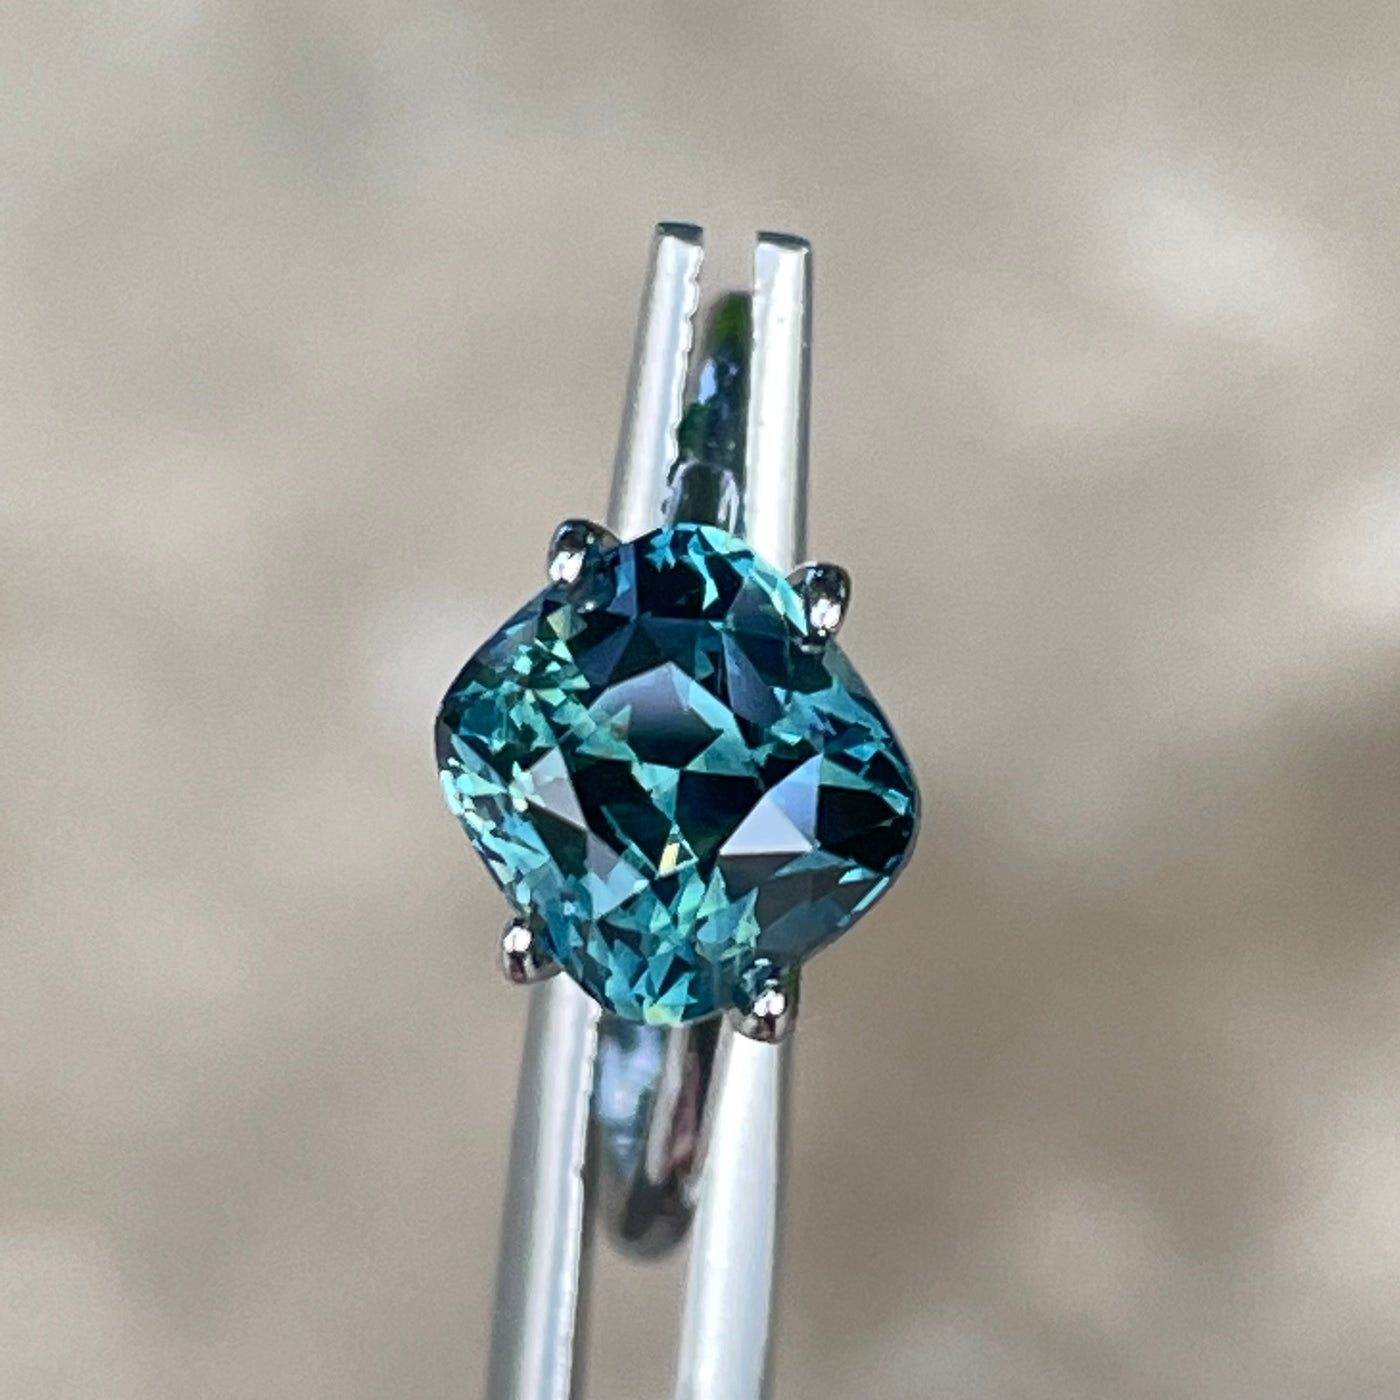 Teal Sapphire  3.54 Ct